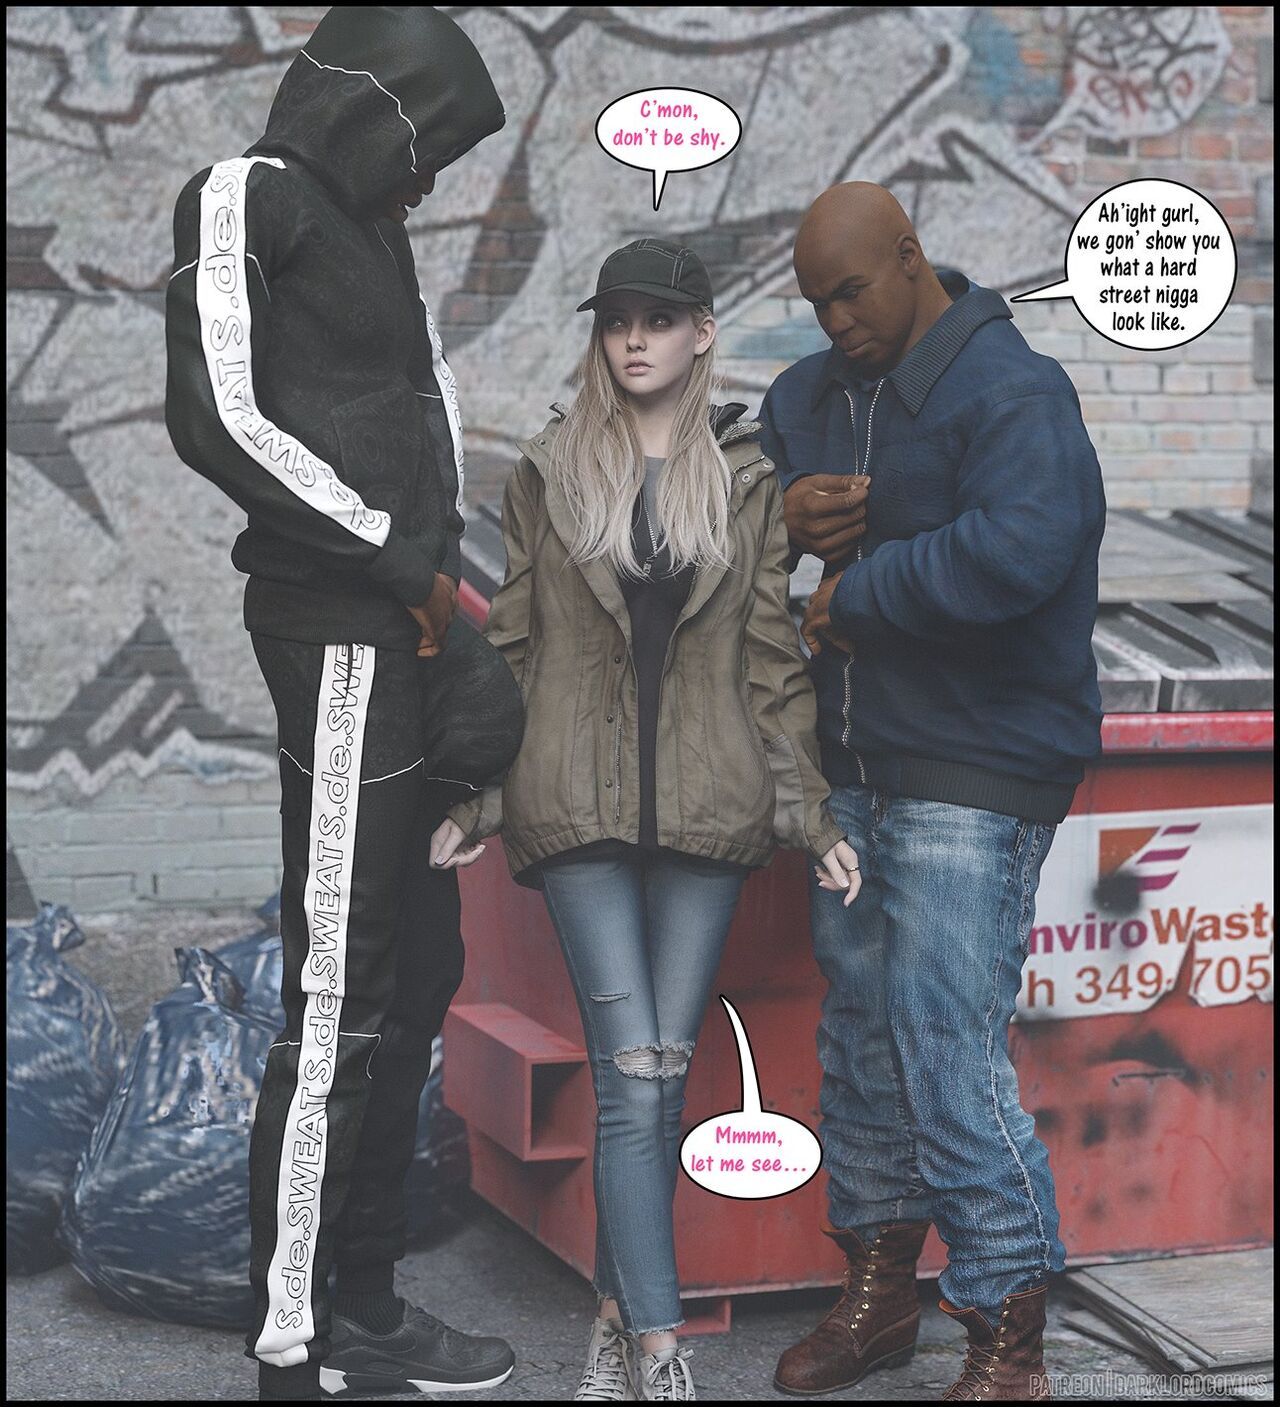 [Darklord] Rose In The Hood (ongoing) 10